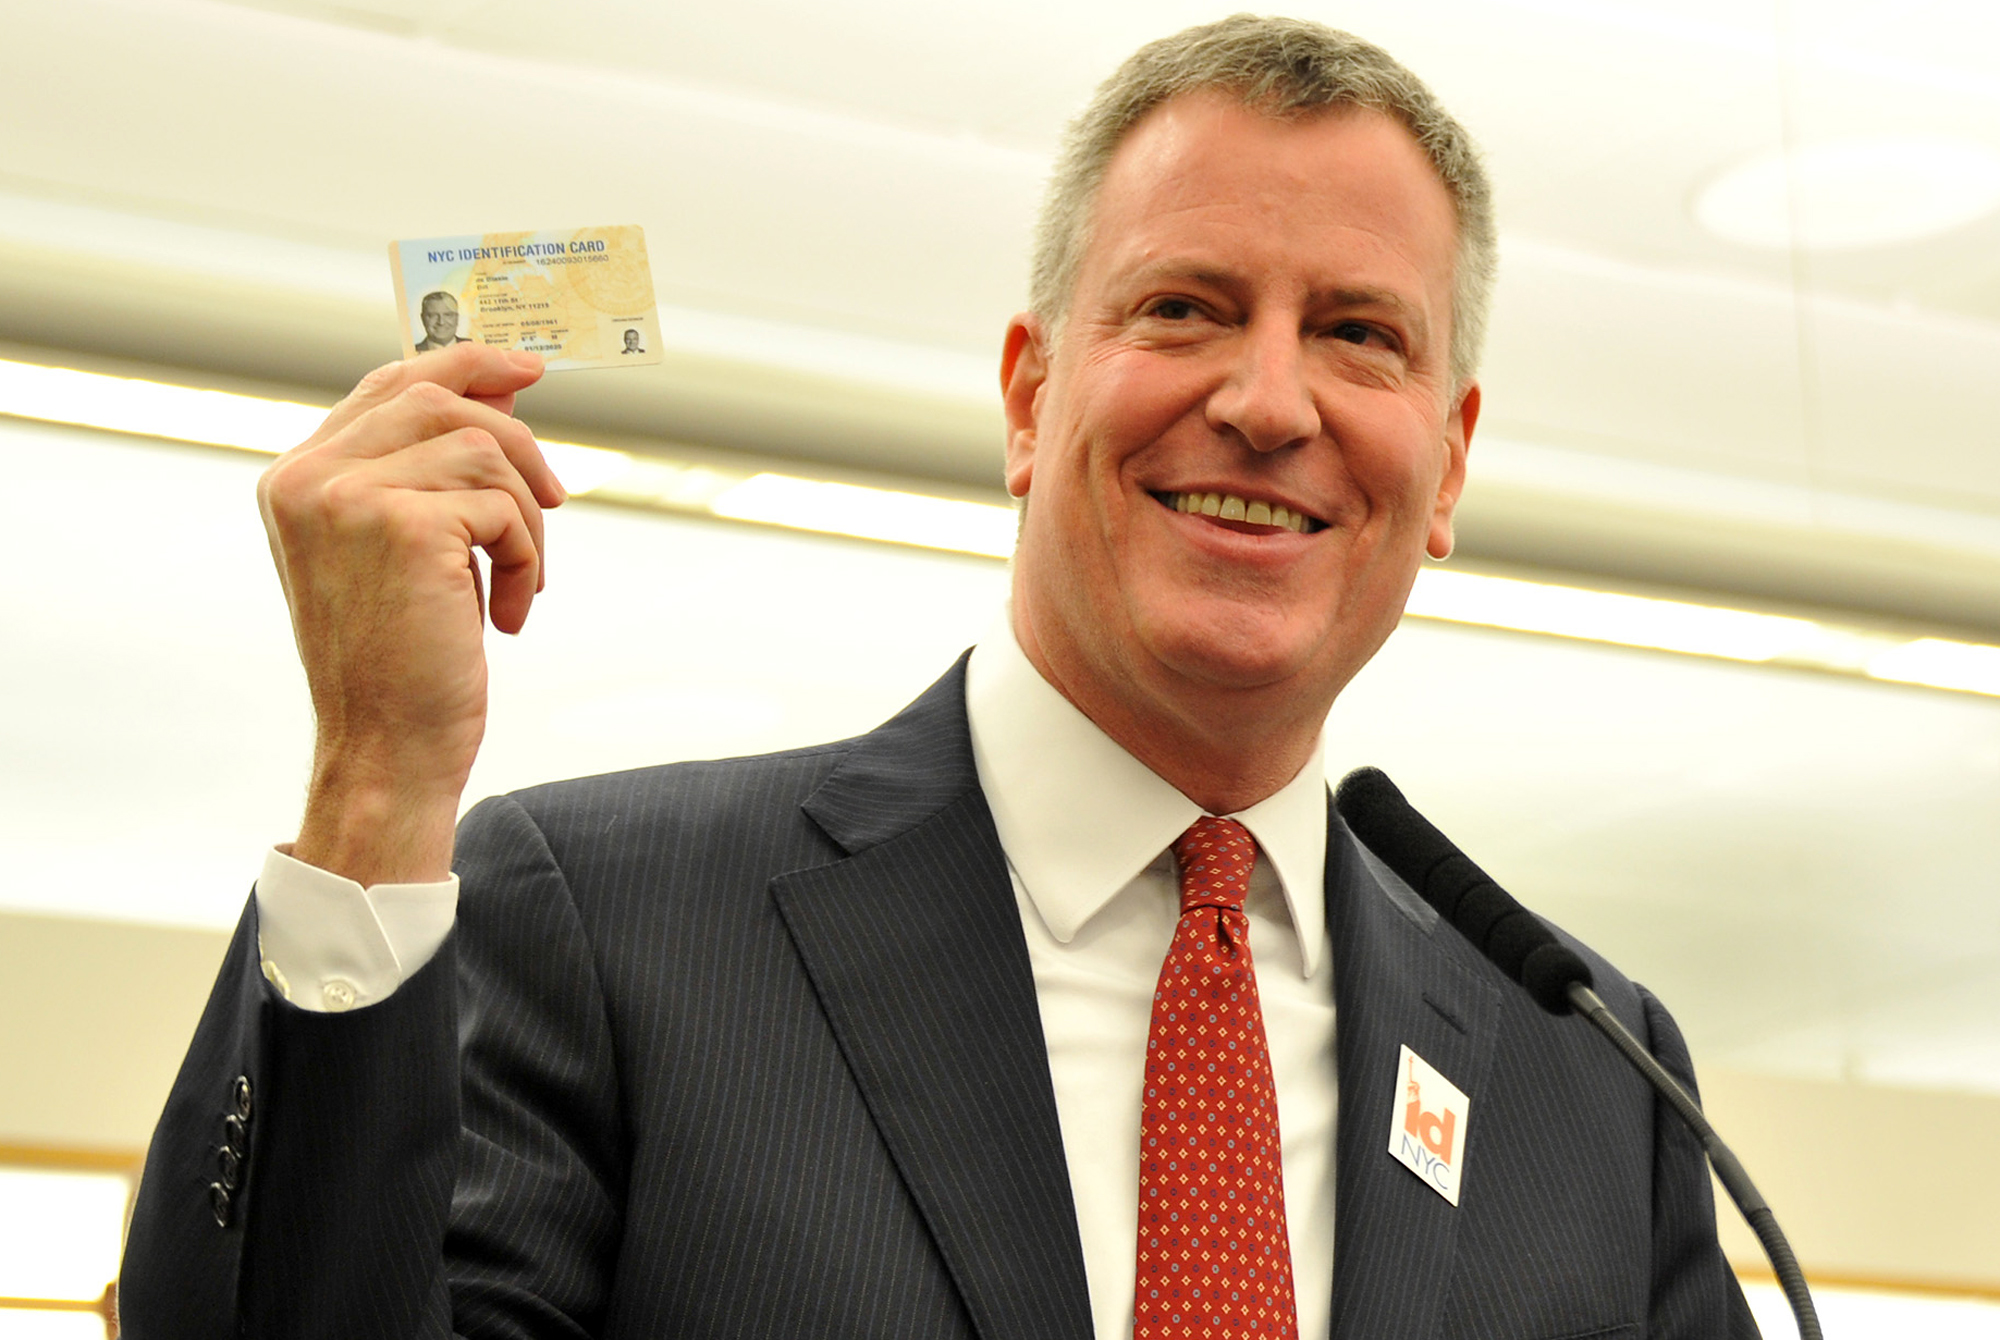 NYC Mayor Bill de Blasio displays his IDNYC Card at the launch of the ambitious project of providing City ID to all residents